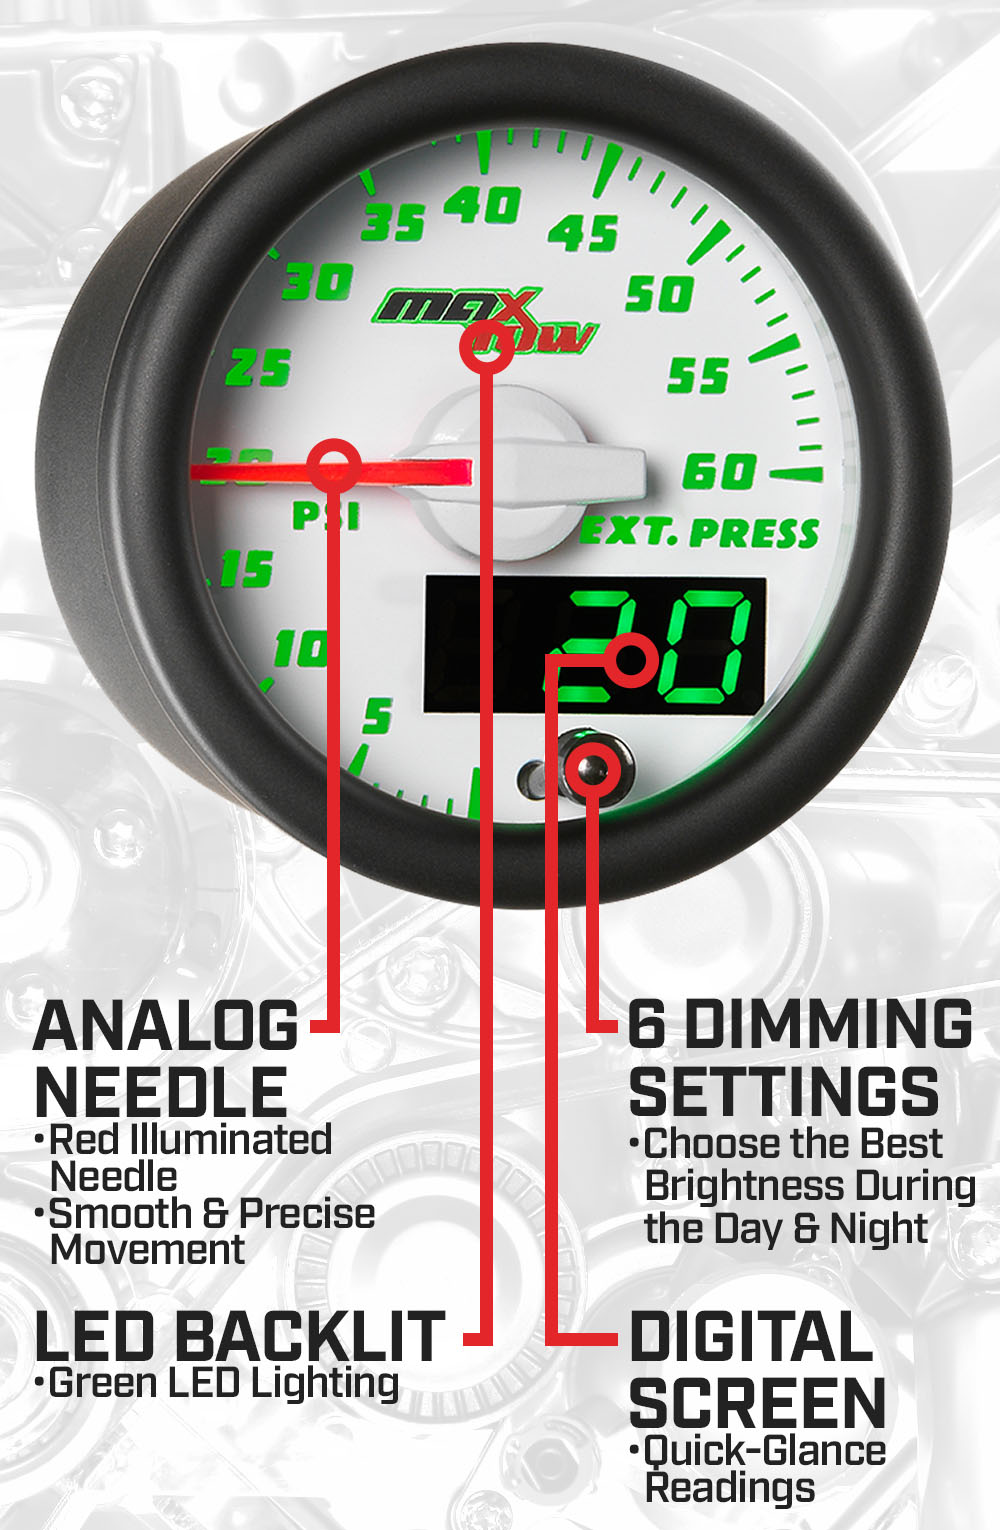 White & Green Double Vision 60 PSI Drive Pressure Gauge Features